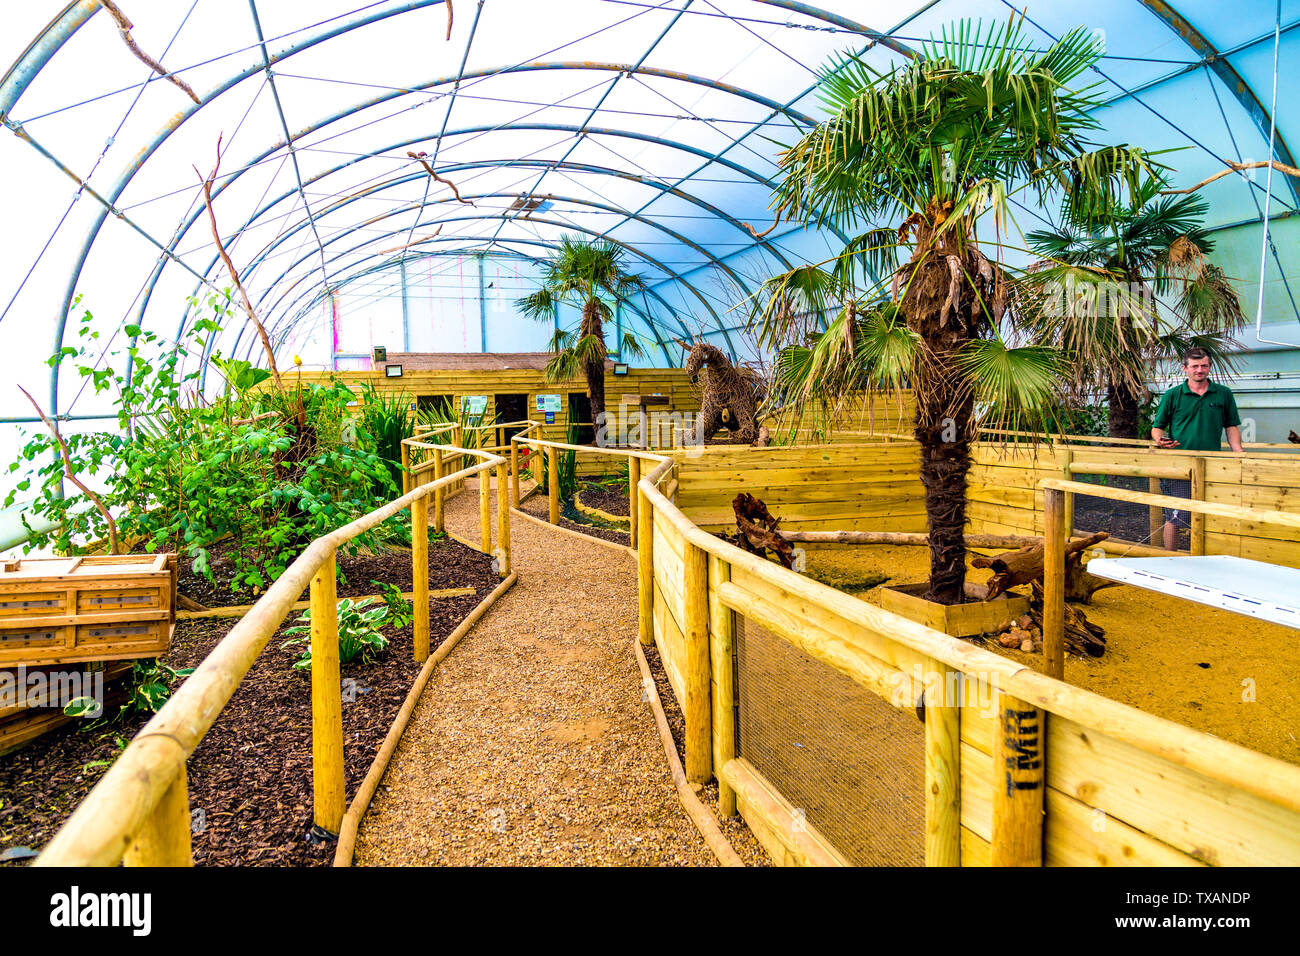 Interior of the Reptile House, Jimmy's Farm, UK Stock Photo